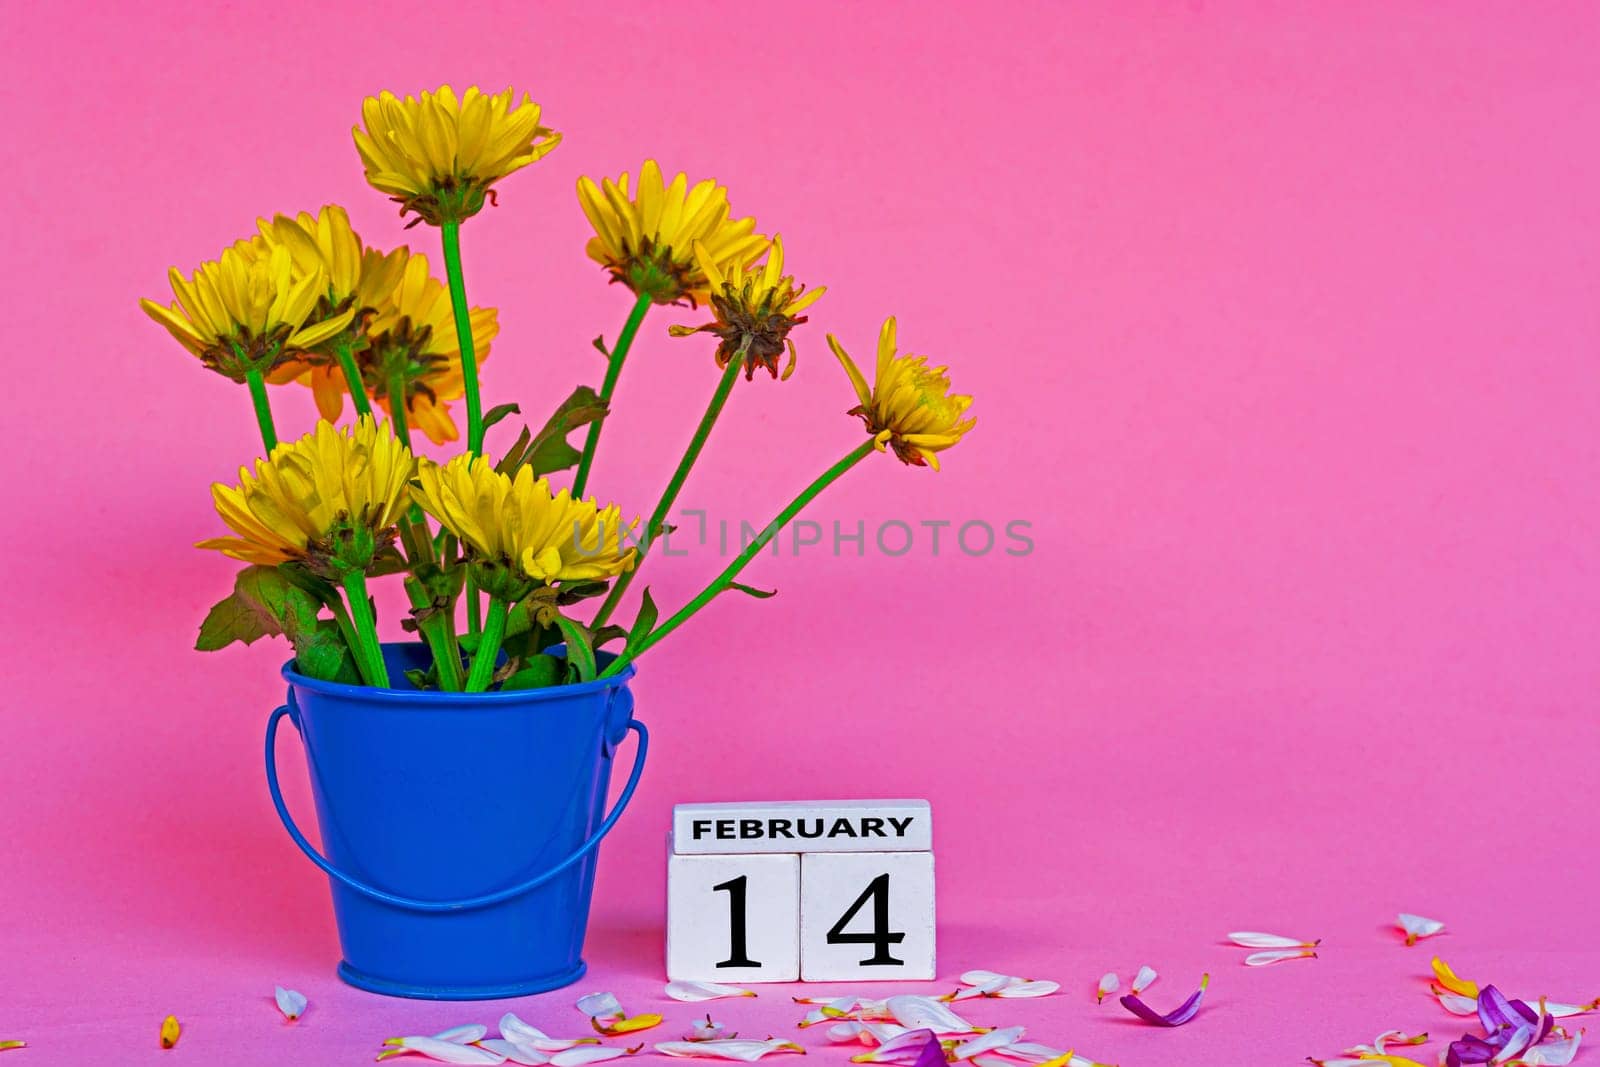 Yellow dahlia flower with wooden block cube on pink background. February 14 celebration with copy space.